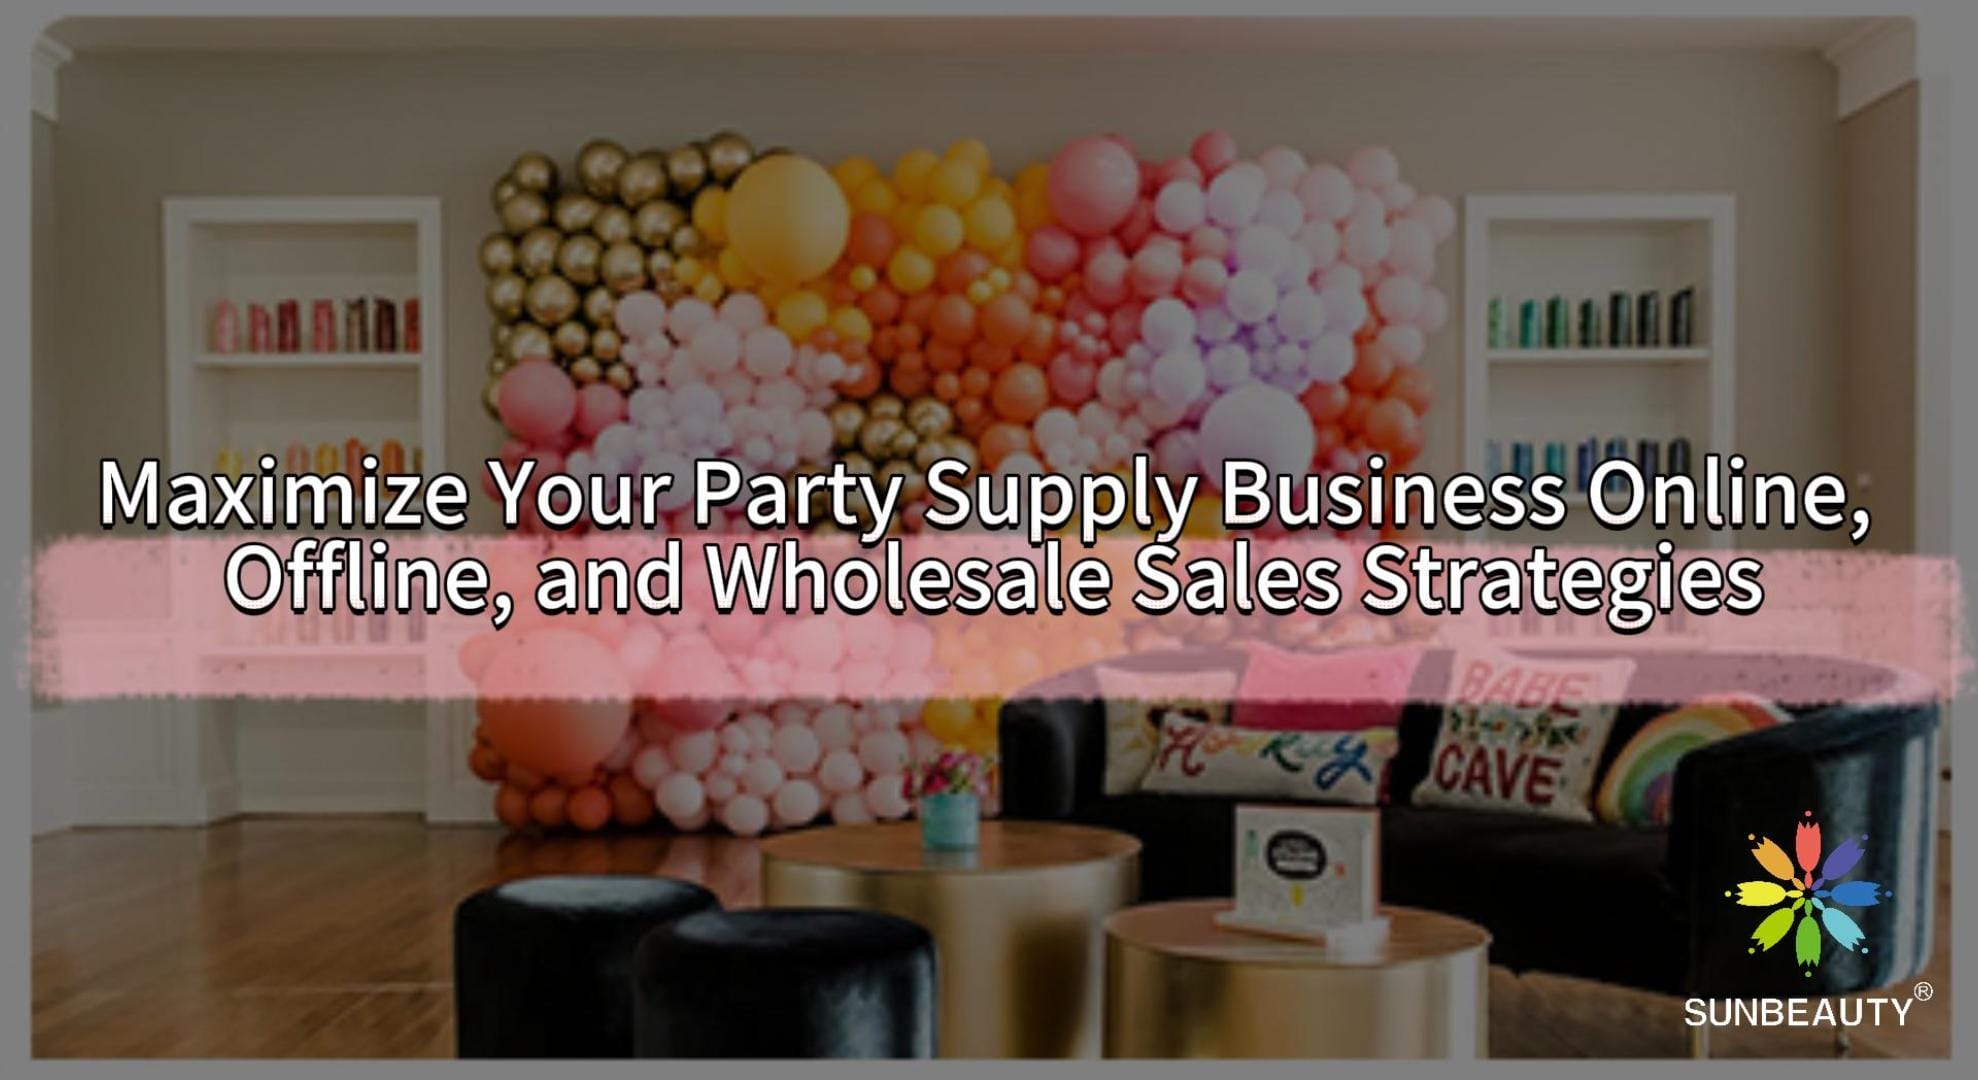 Maximize Your Party Supply Business Online, Offline, and Wholesale Sales Strategies